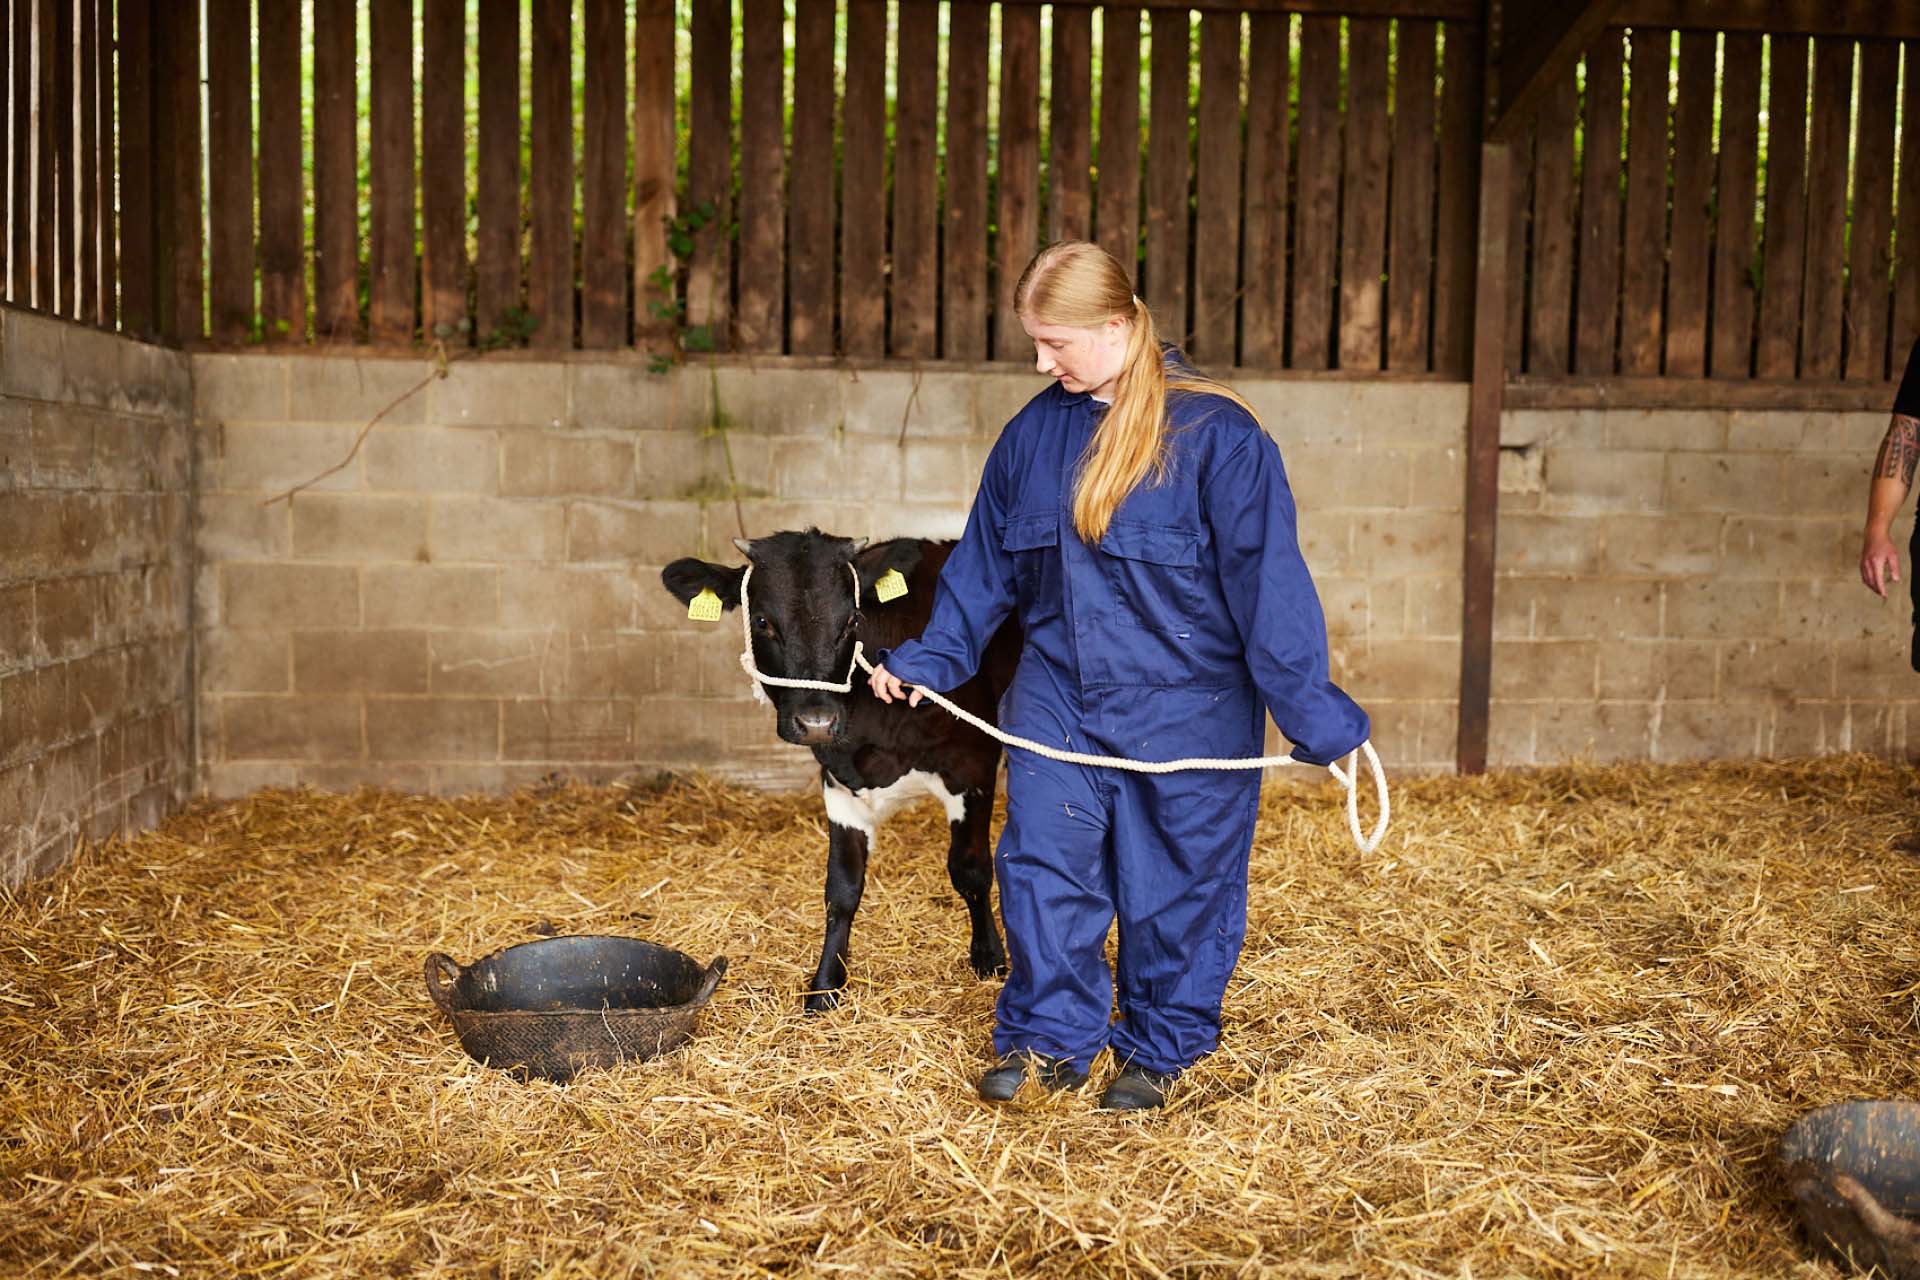 A calf has a rope around it's head in a barn at Temple Newsham full of hay, and is being guided by someone wearing navy overalls to walk forwards